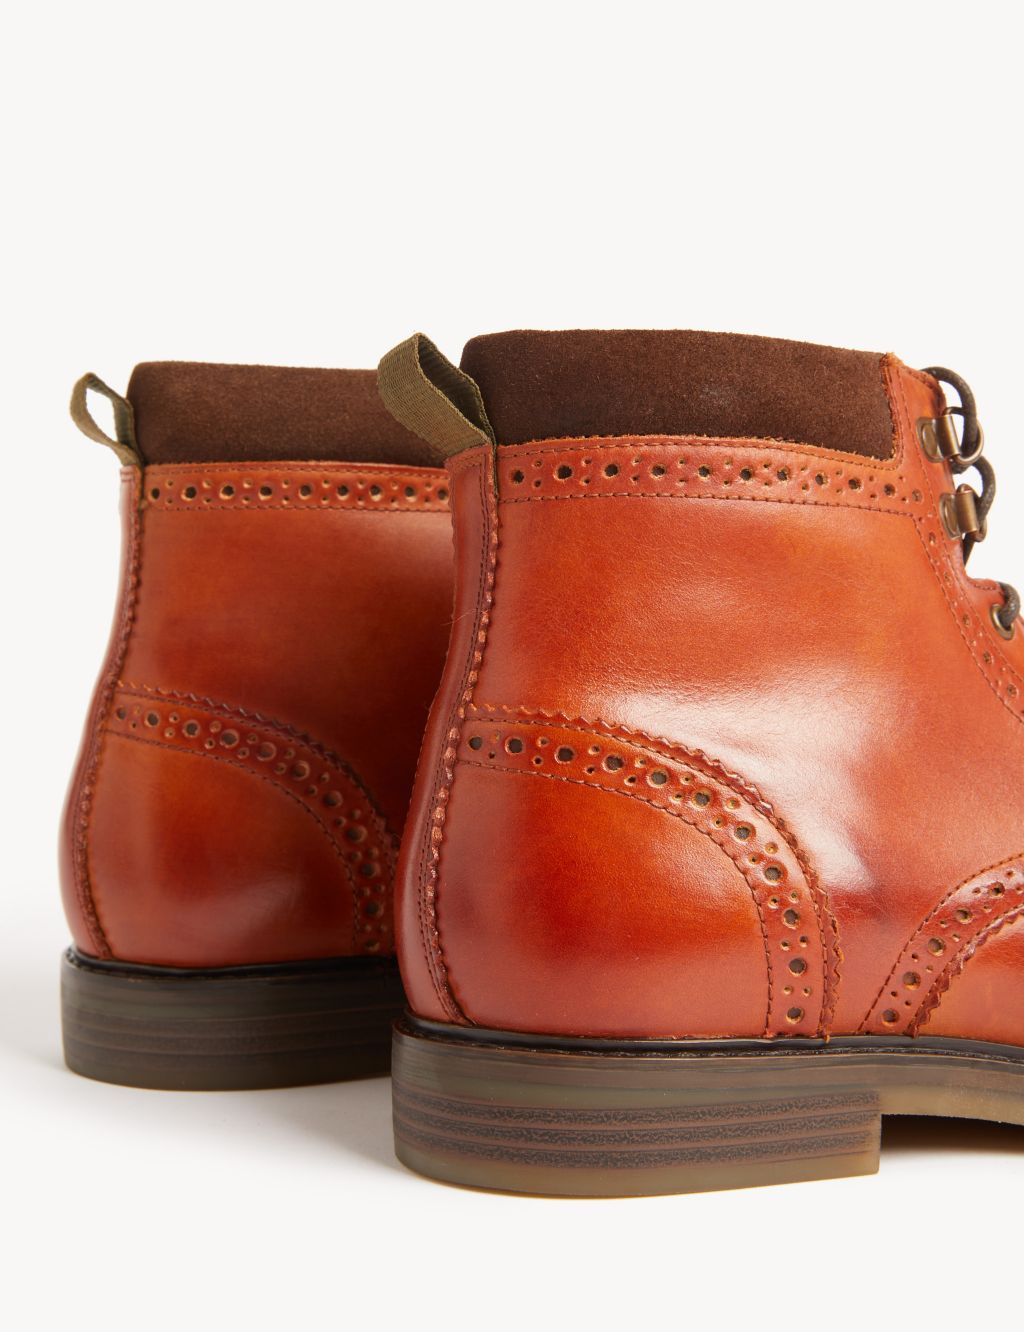 Leather Brogue Boot image 2